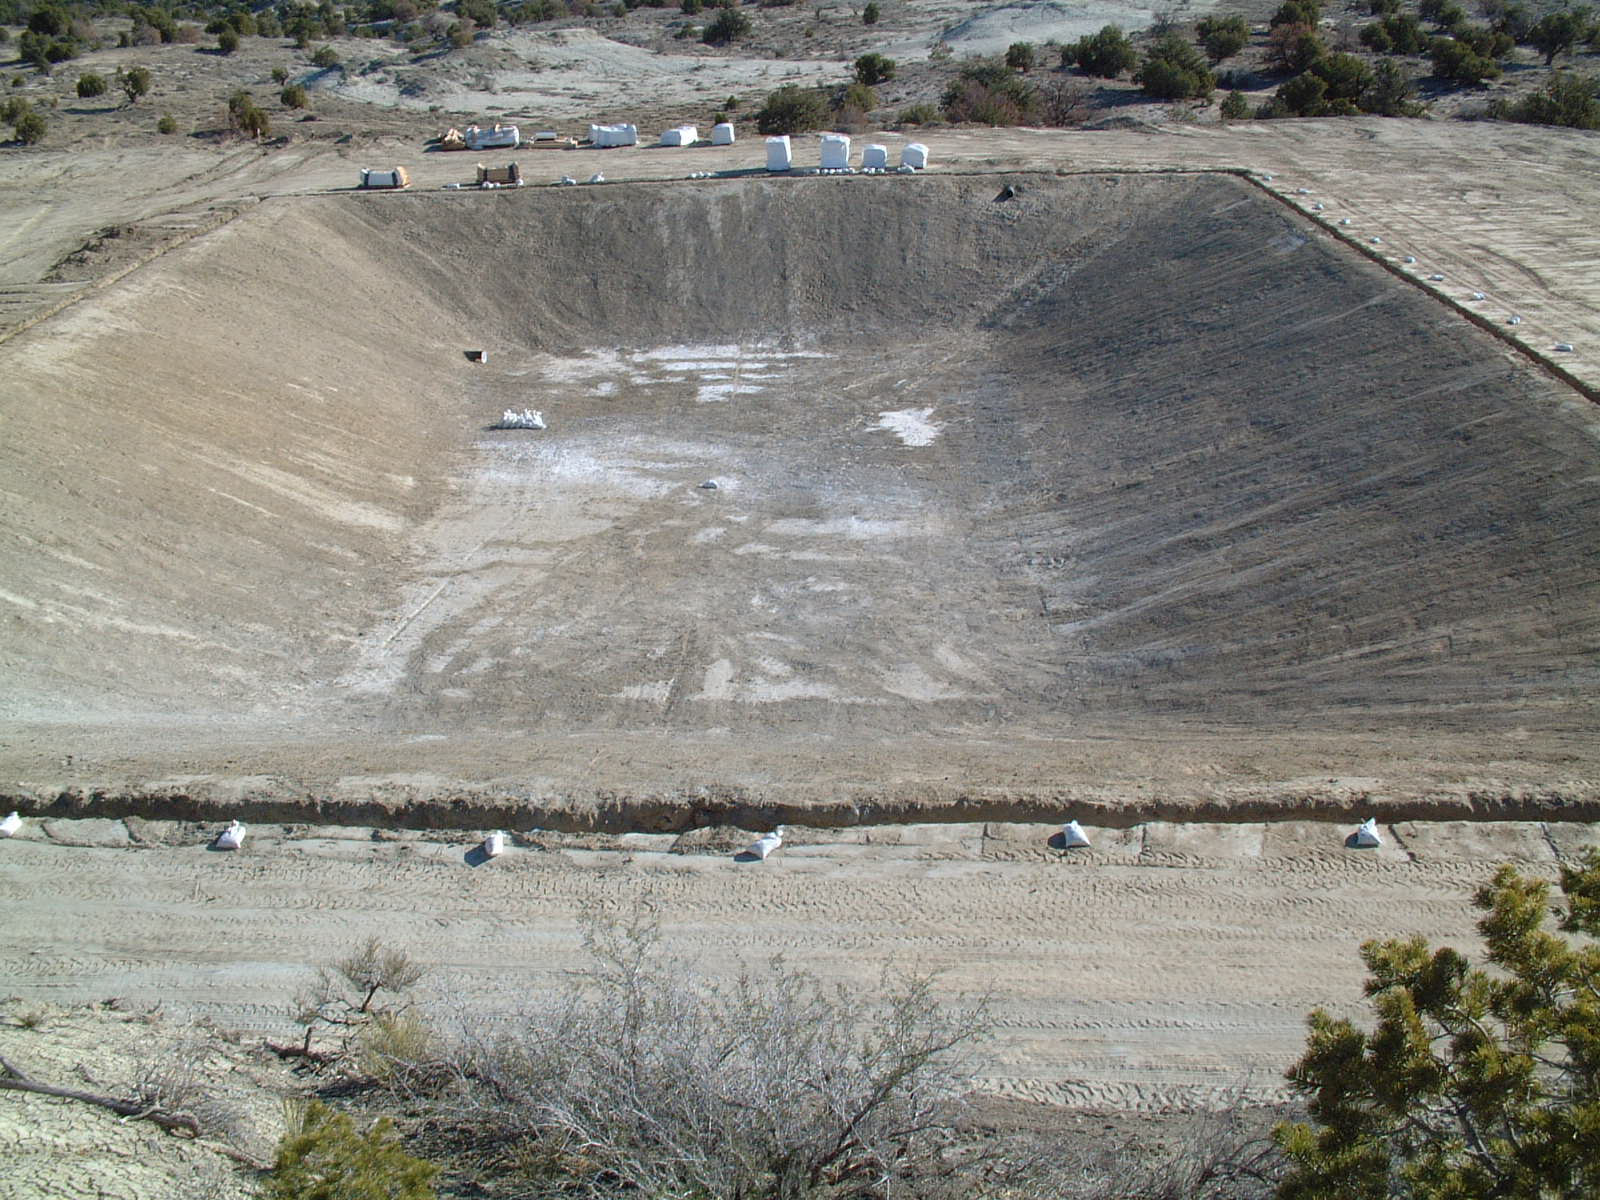 A large dirt pit with cars parked on top of it.